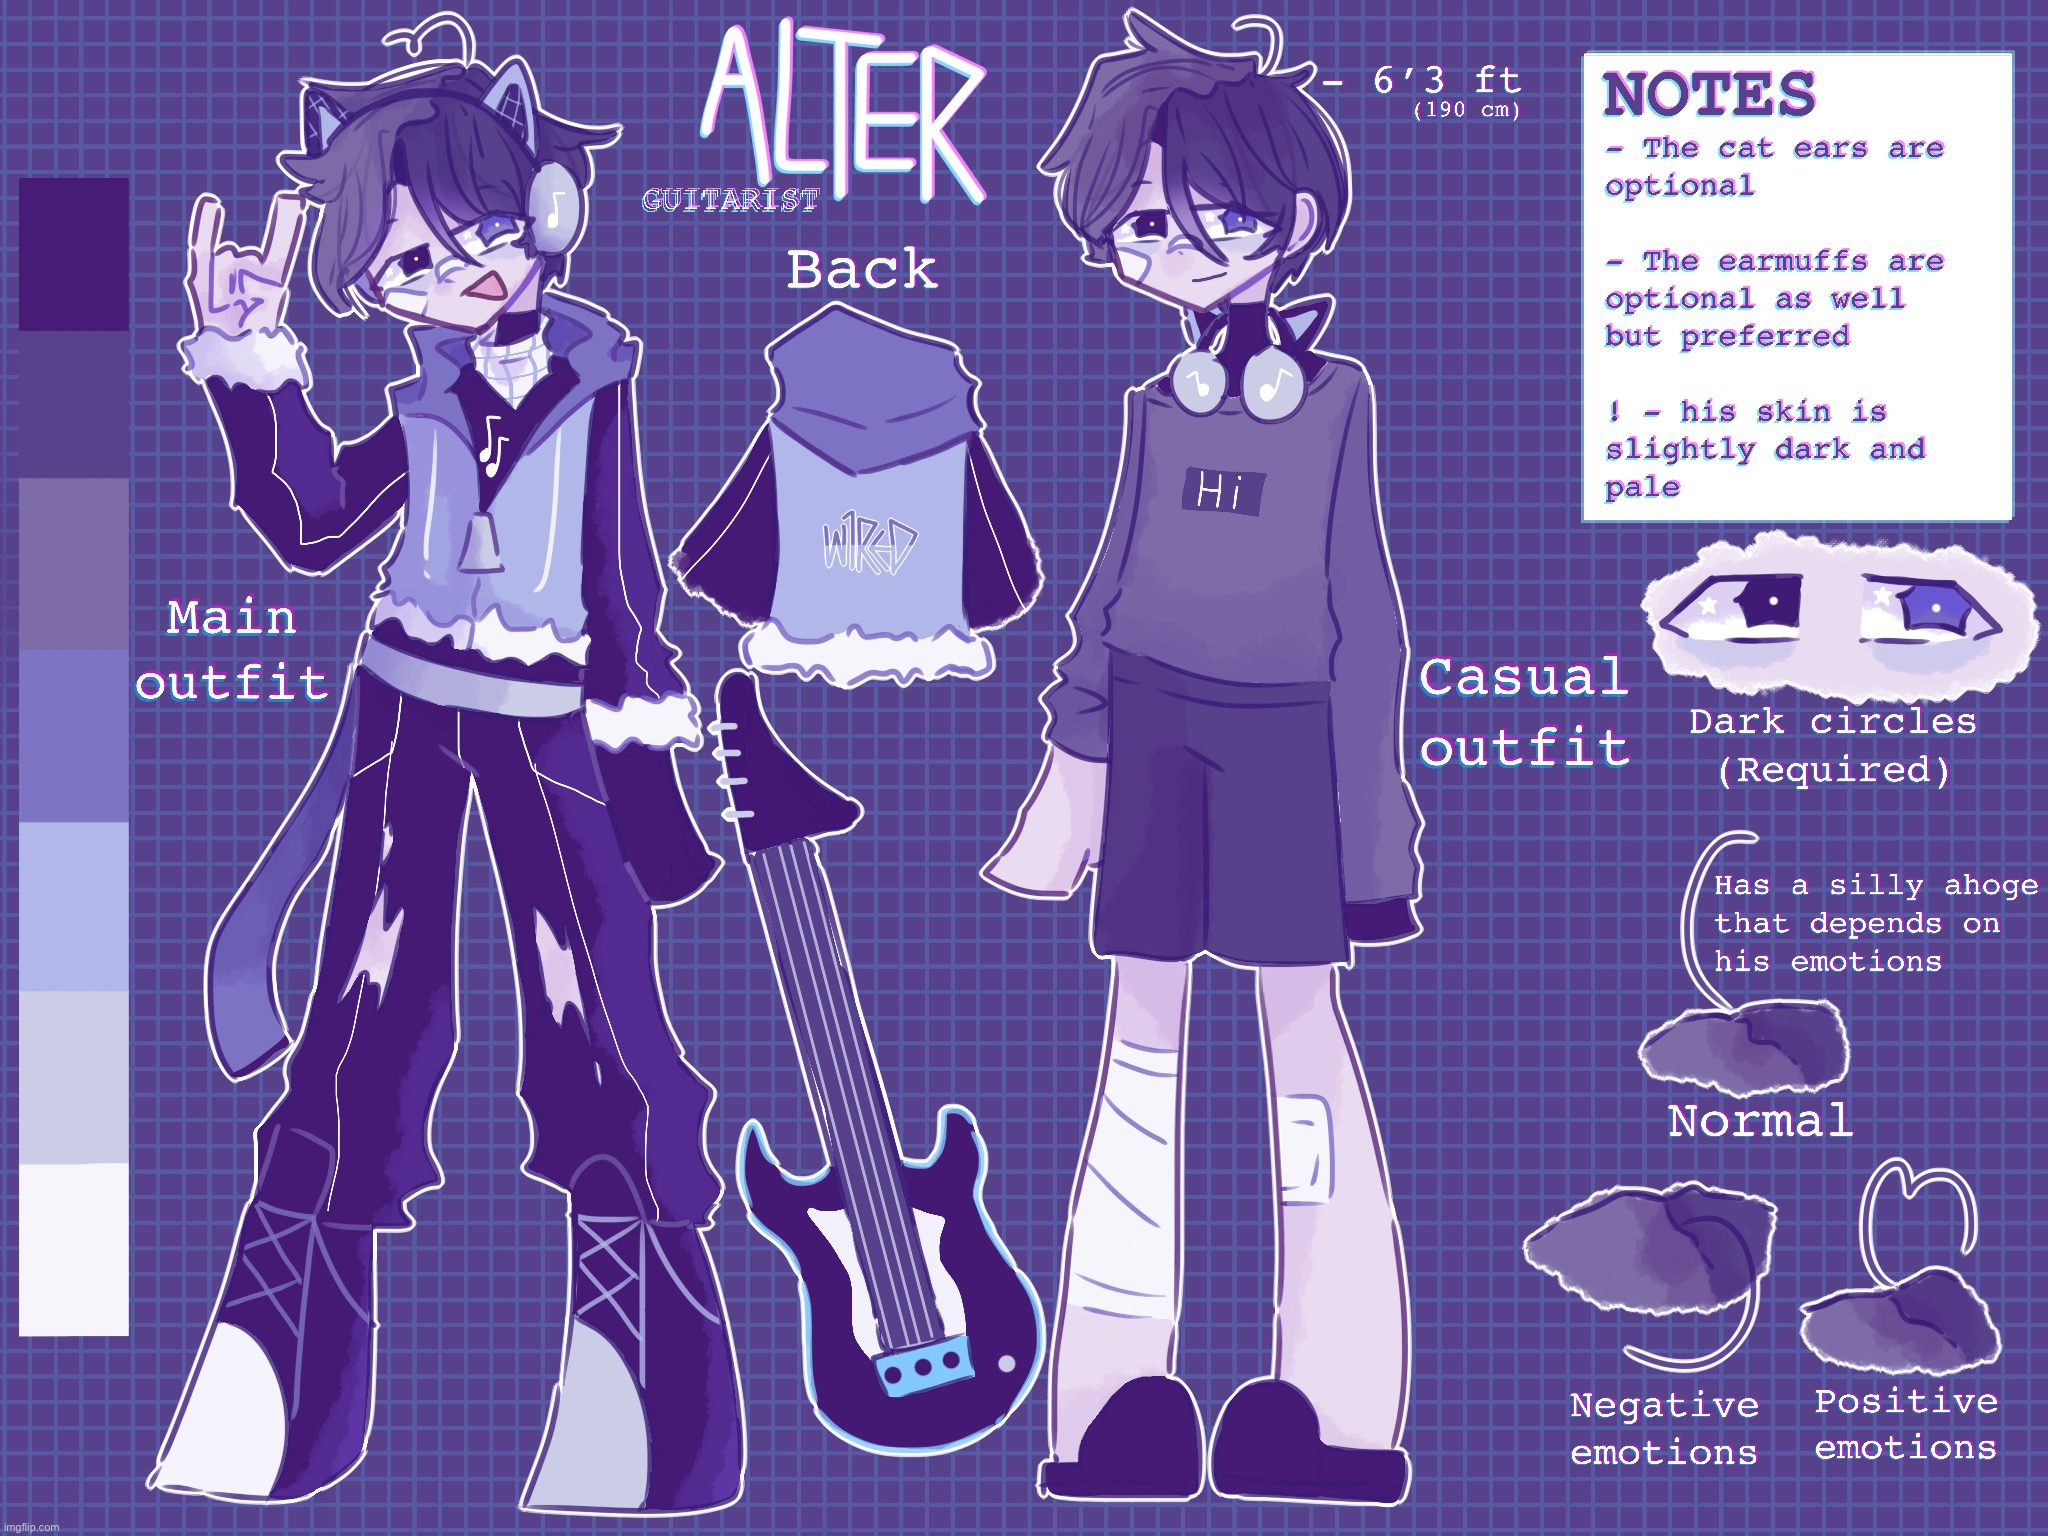 Shiyu creates an oc holy shit!1!1!1!1!1! (Info in description) | [ABOUT] He/him, 23, guitarist and the only real human | despite his somewhat sickly appearance he is completely alright and cheerful. He is very popular among women and is also known for being almost 6’3 ft tall. He is jovial among close people, calm and peaceful among strangers usually, but there are times he is REALLY shy for some reason. He is very random and clumsy and got injured multiple times as a consequence which explains the bandages. He is never hesitant to express affection to friends regardless of gender and laughs and smiles very easily. The cat earmuffs was a gift from his last ex-girlfriend whom he broke up with right before he debuted, and you rarely see him without it (he is not a catboy) | made w/ Imgflip meme maker